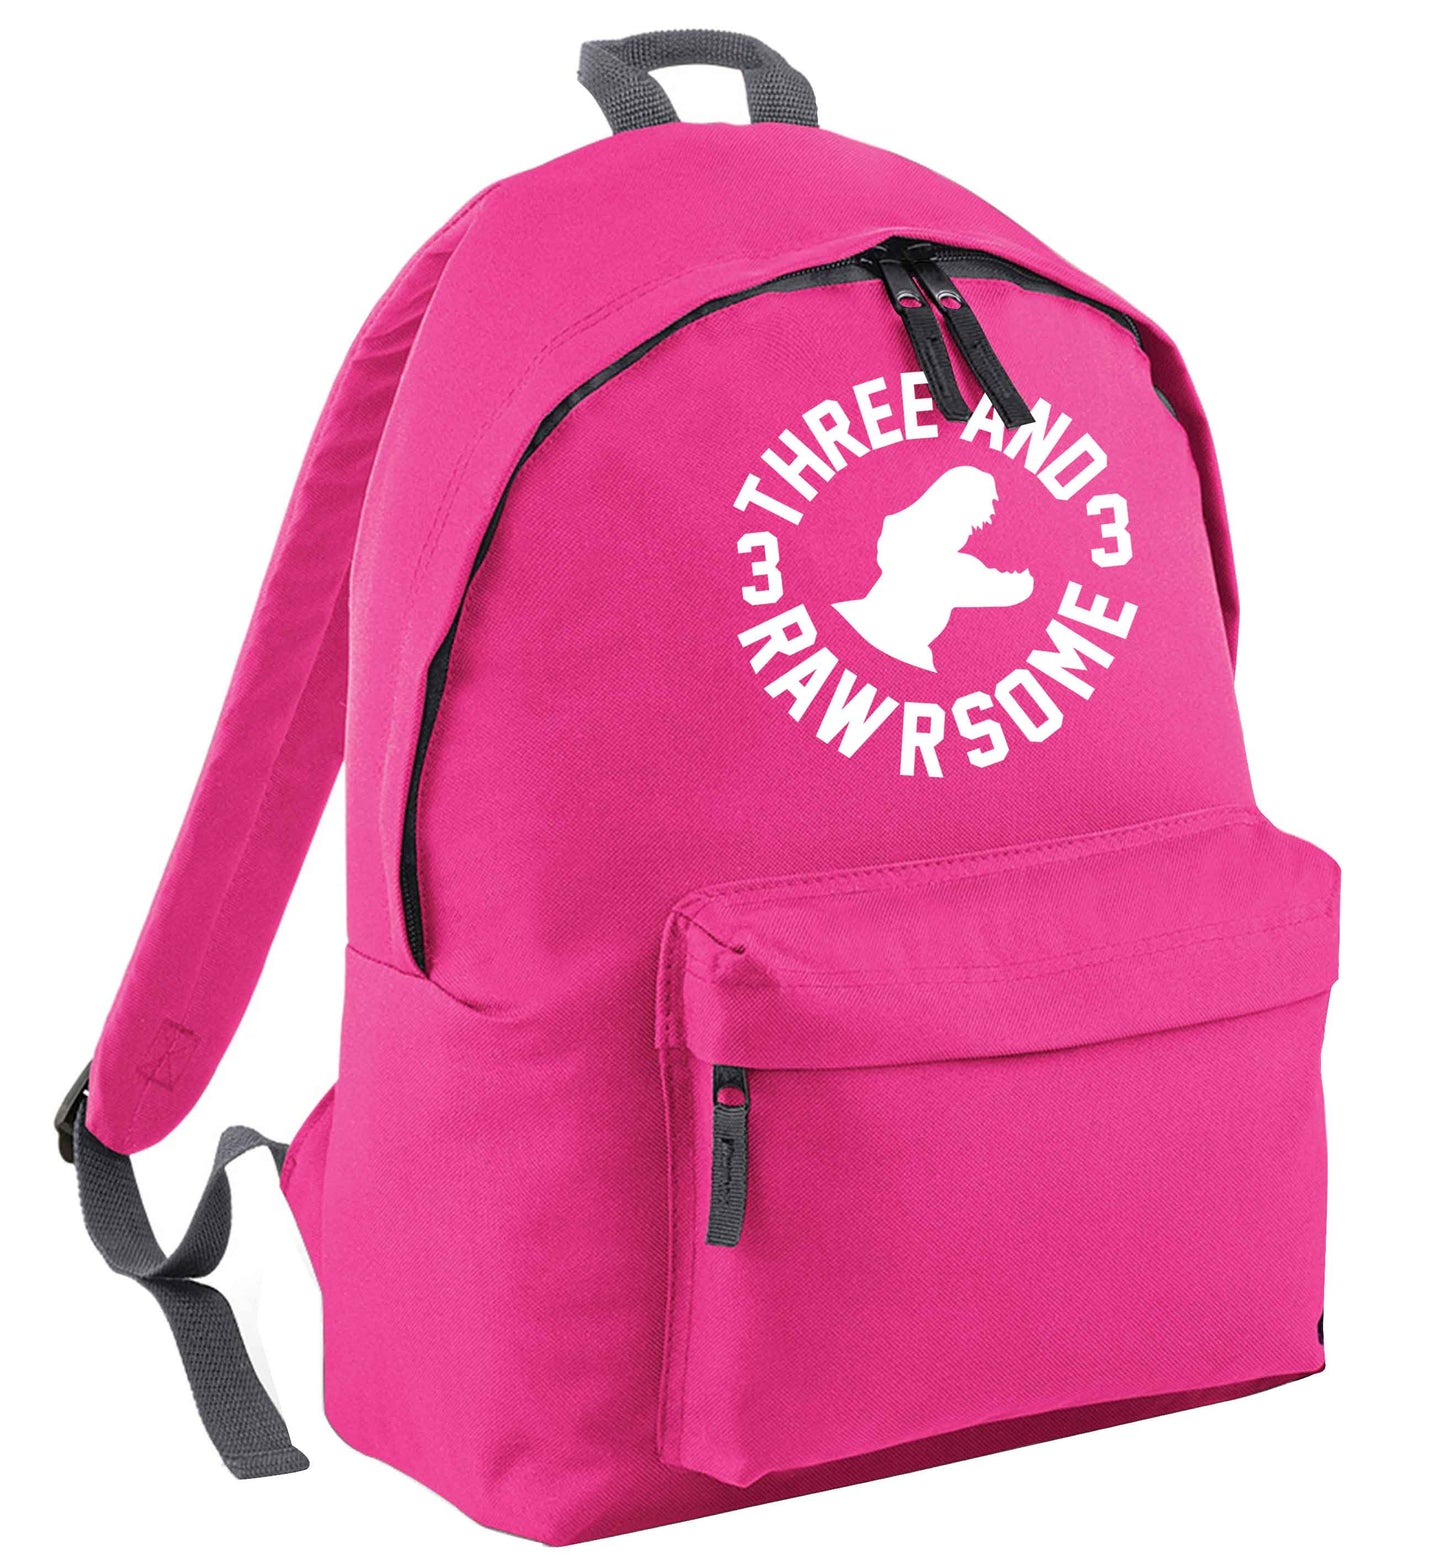 Three and rawrsome pink childrens backpack